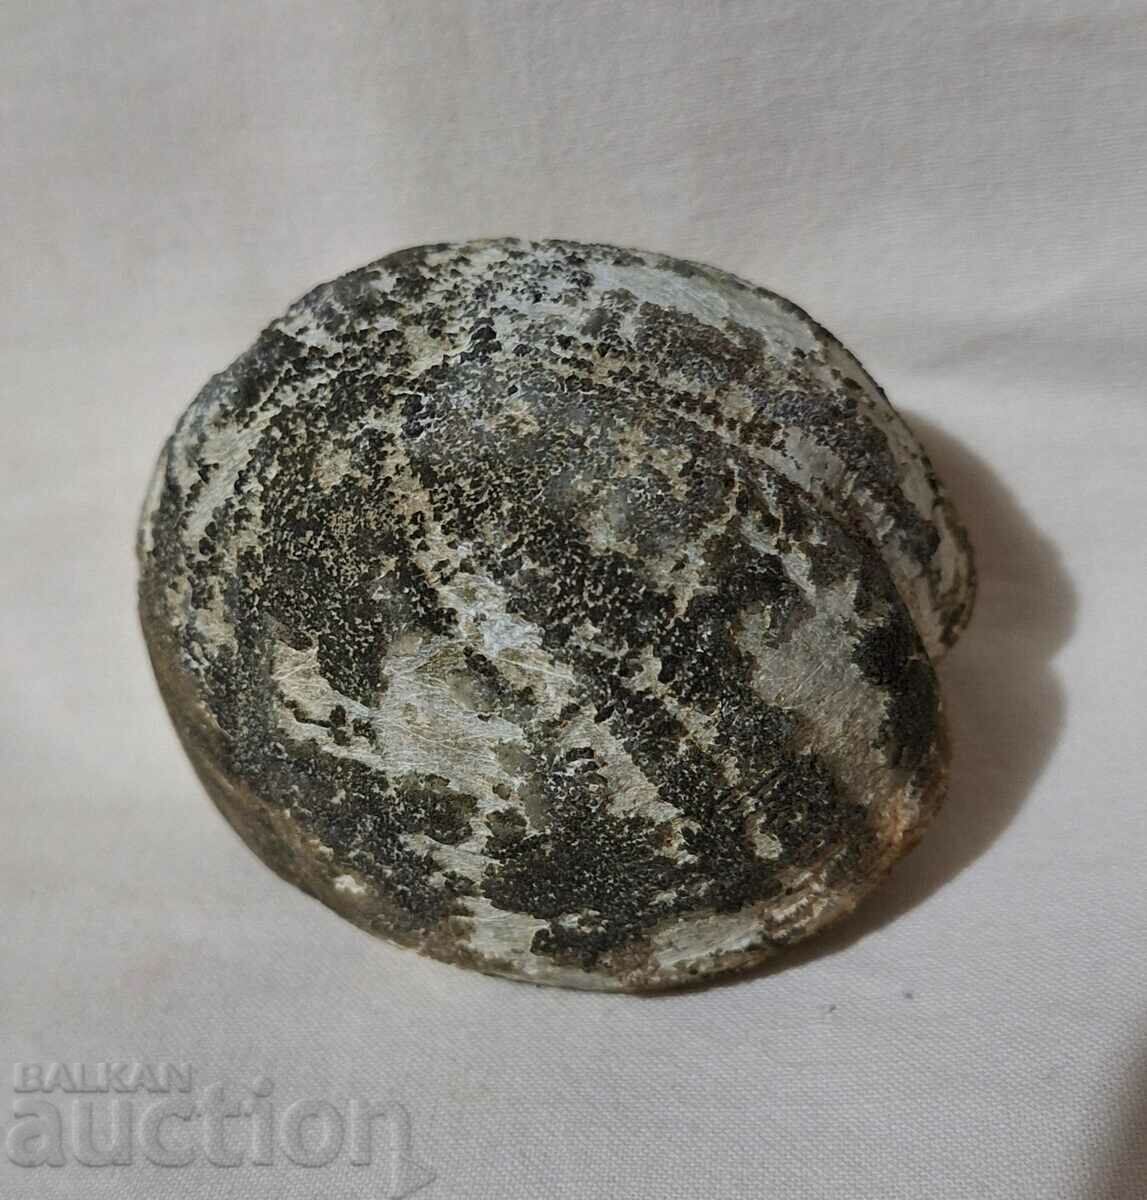 Fossil fossil stone